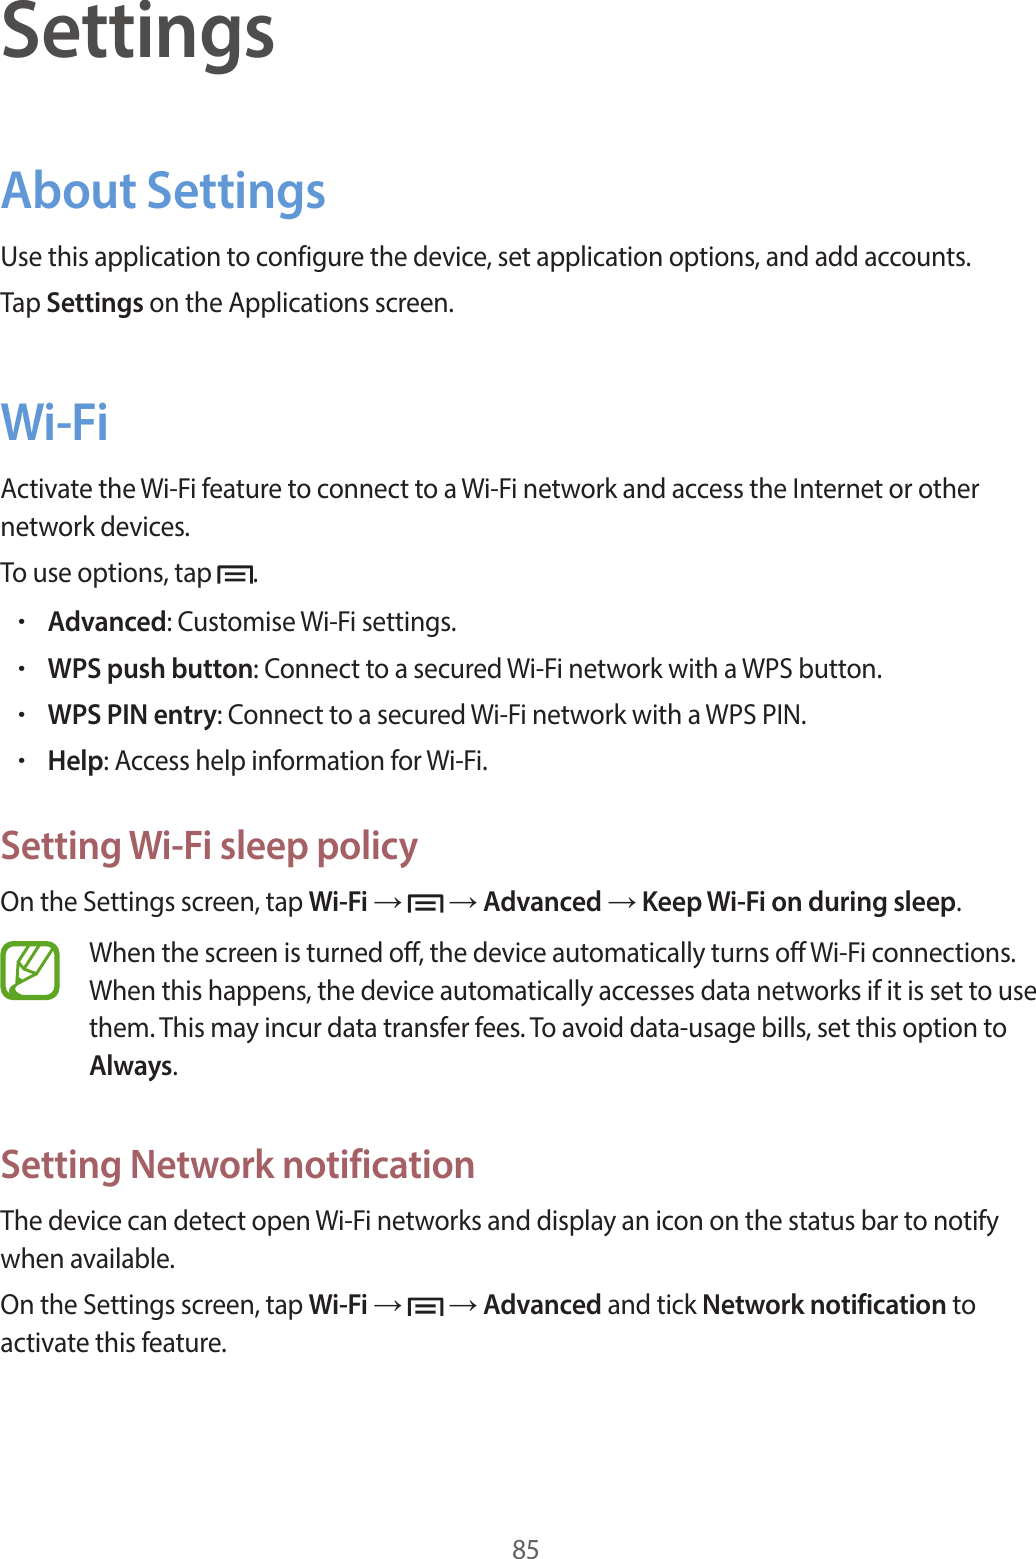 85SettingsAbout SettingsUse this application to configure the device, set application options, and add accounts.Tap Settings on the Applications screen.Wi-FiActivate the Wi-Fi feature to connect to a Wi-Fi network and access the Internet or other network devices.To use options, tap  .•Advanced: Customise Wi-Fi settings.•WPS push button: Connect to a secured Wi-Fi network with a WPS button.•WPS PIN entry: Connect to a secured Wi-Fi network with a WPS PIN.•Help: Access help information for Wi-Fi.Setting Wi-Fi sleep policyOn the Settings screen, tap Wi-Fi →   → Advanced → Keep Wi-Fi on during sleep.When the screen is turned off, the device automatically turns off Wi-Fi connections. When this happens, the device automatically accesses data networks if it is set to use them. This may incur data transfer fees. To avoid data-usage bills, set this option to Always.Setting Network notificationThe device can detect open Wi-Fi networks and display an icon on the status bar to notify when available.On the Settings screen, tap Wi-Fi →   → Advanced and tick Network notification to activate this feature.